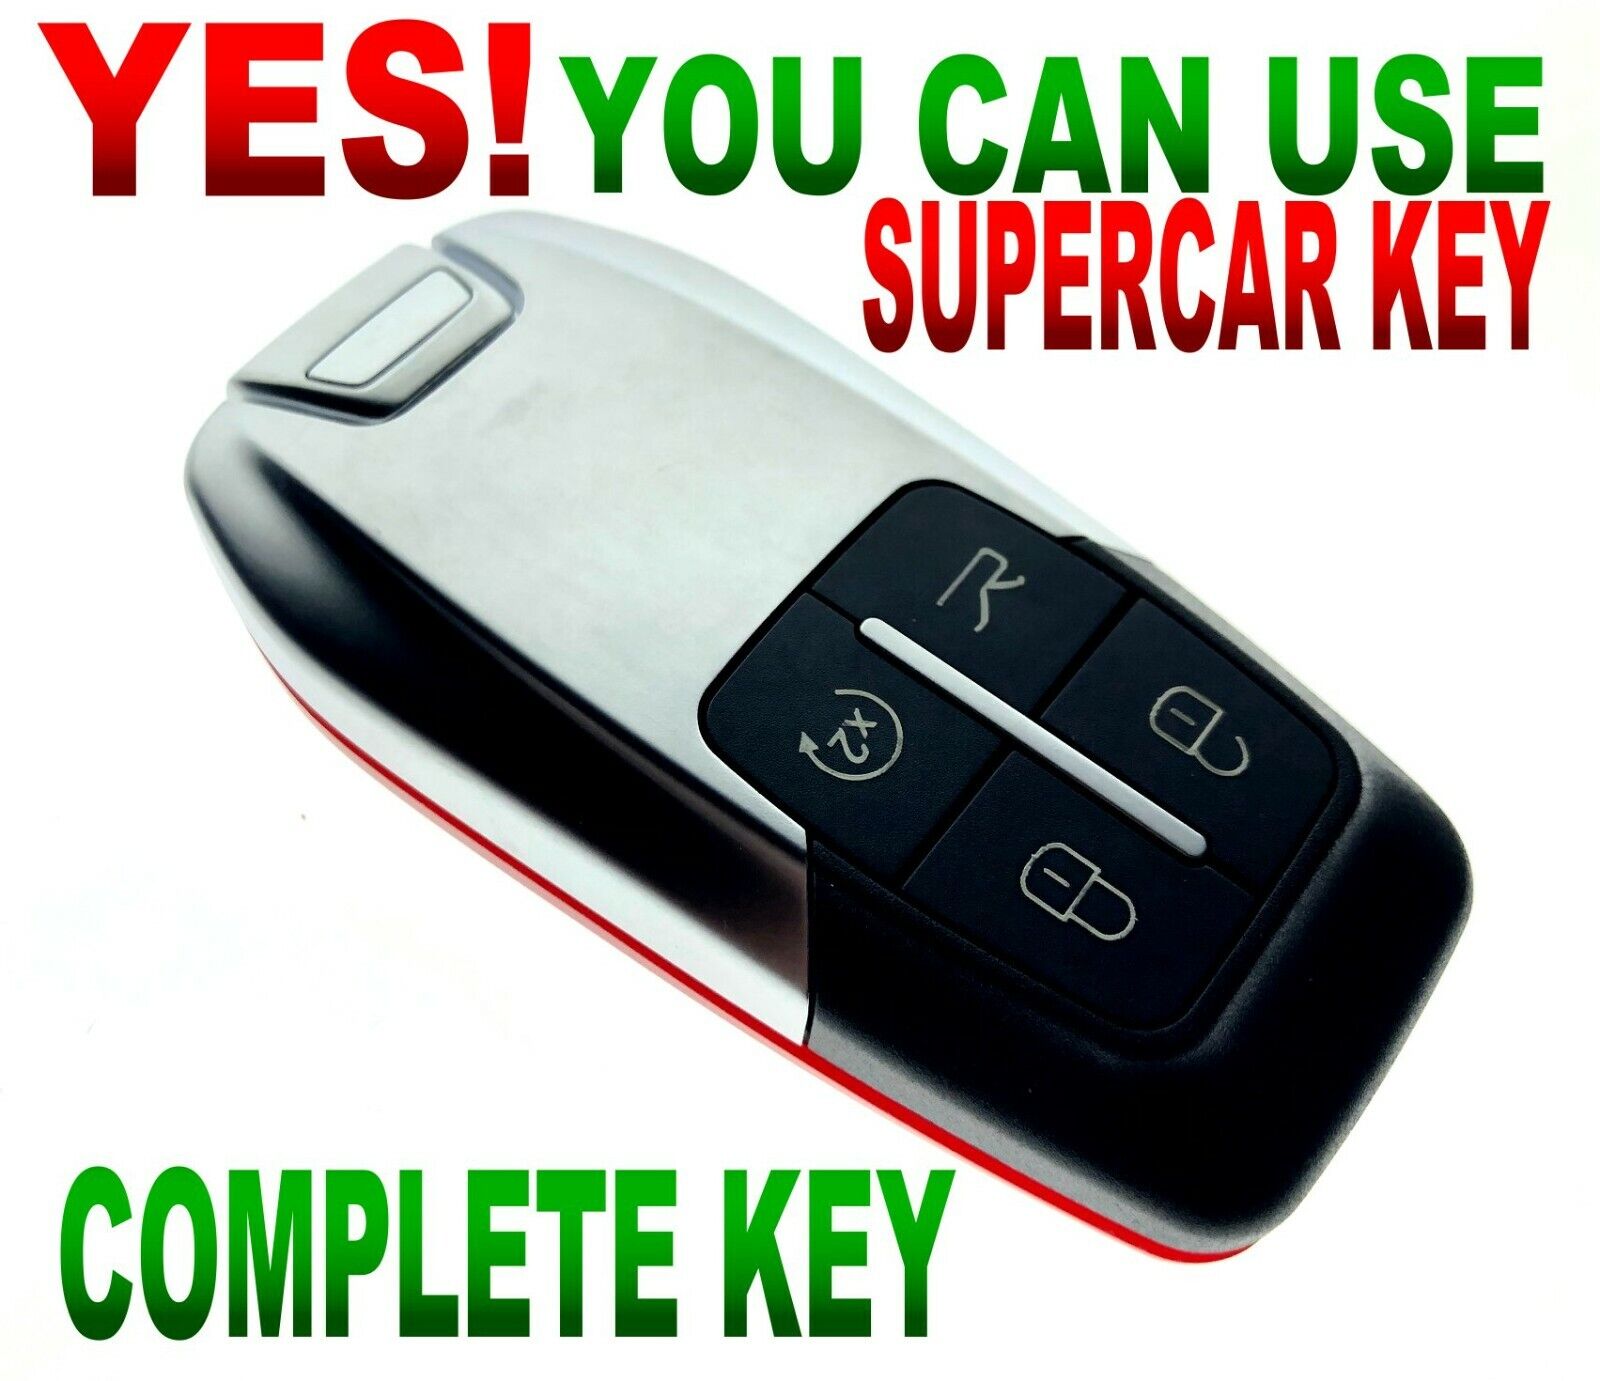 SUPERCAR SMART KEY FOR Dodge KEYLESS ENTRY CHIP REMOTE fob PROXY M3N-40821302